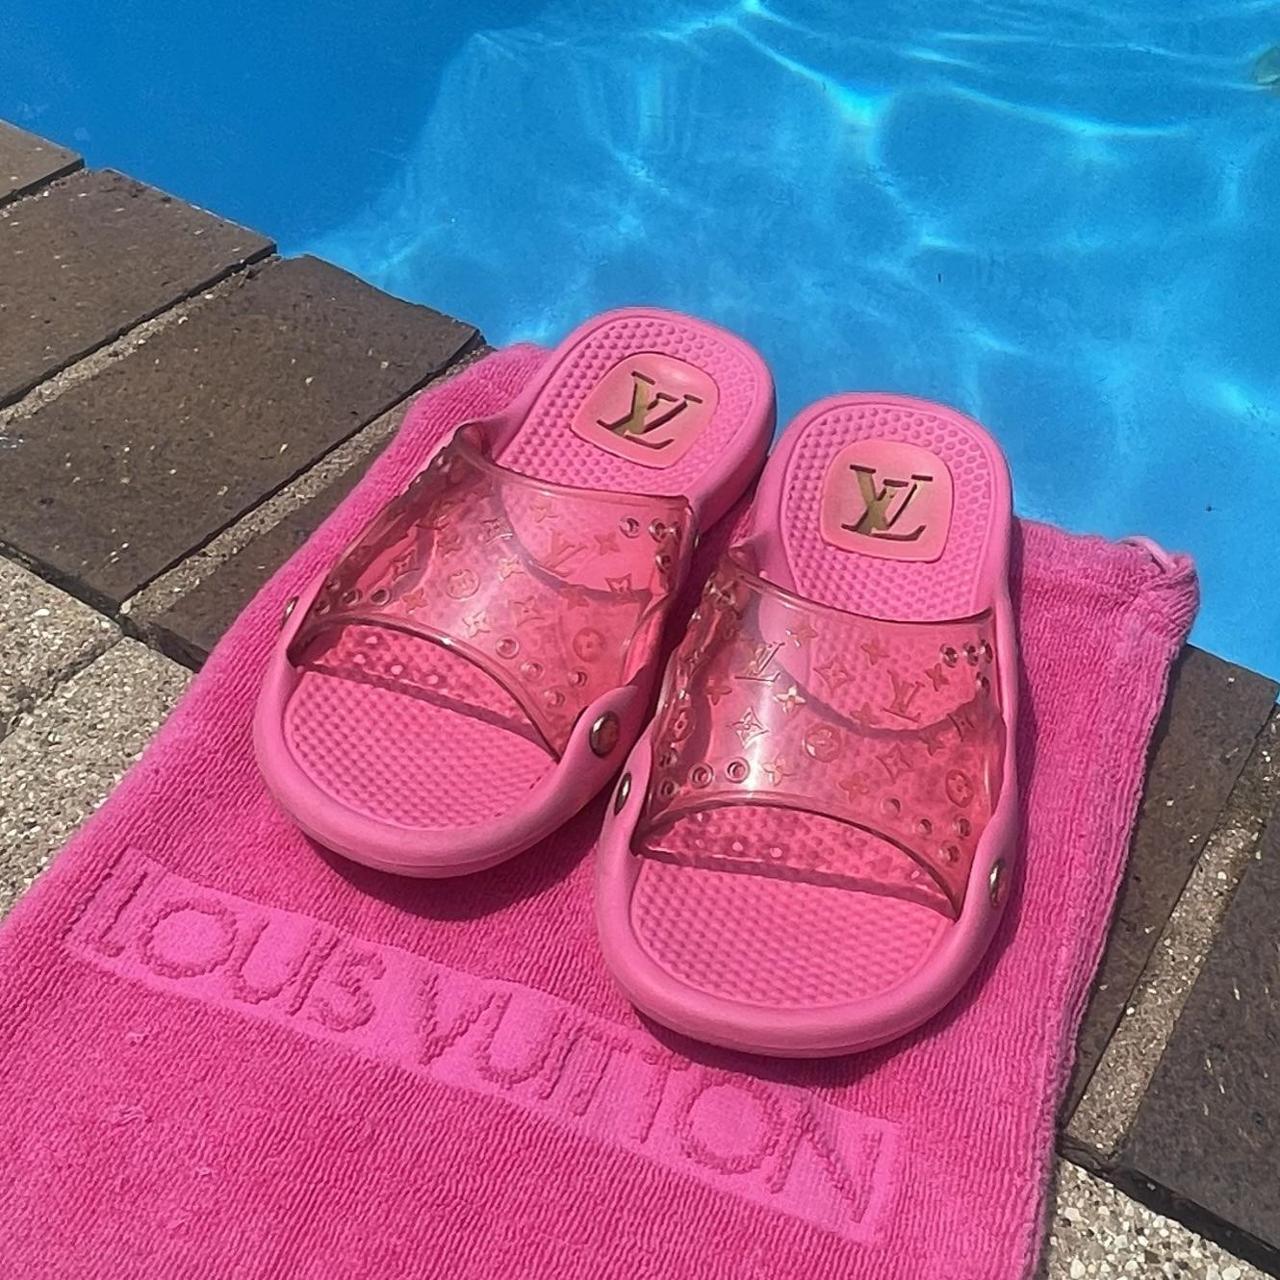 Vintage Louis Vuitton pool slides. Stepped in sticky - Depop